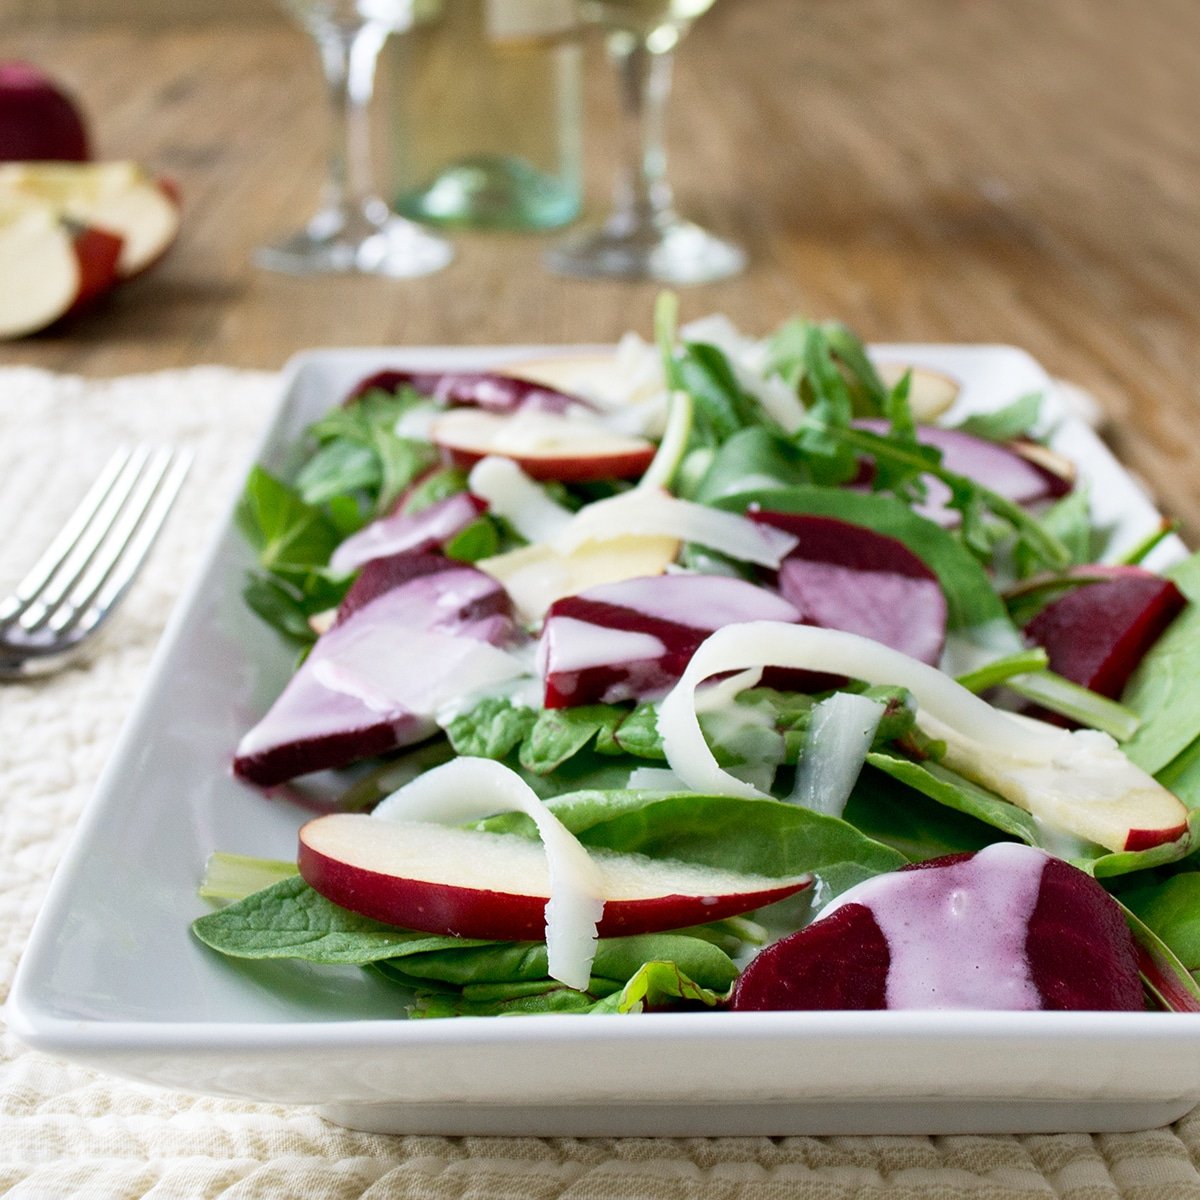 Beet and kale salad with Parmesan shavings.